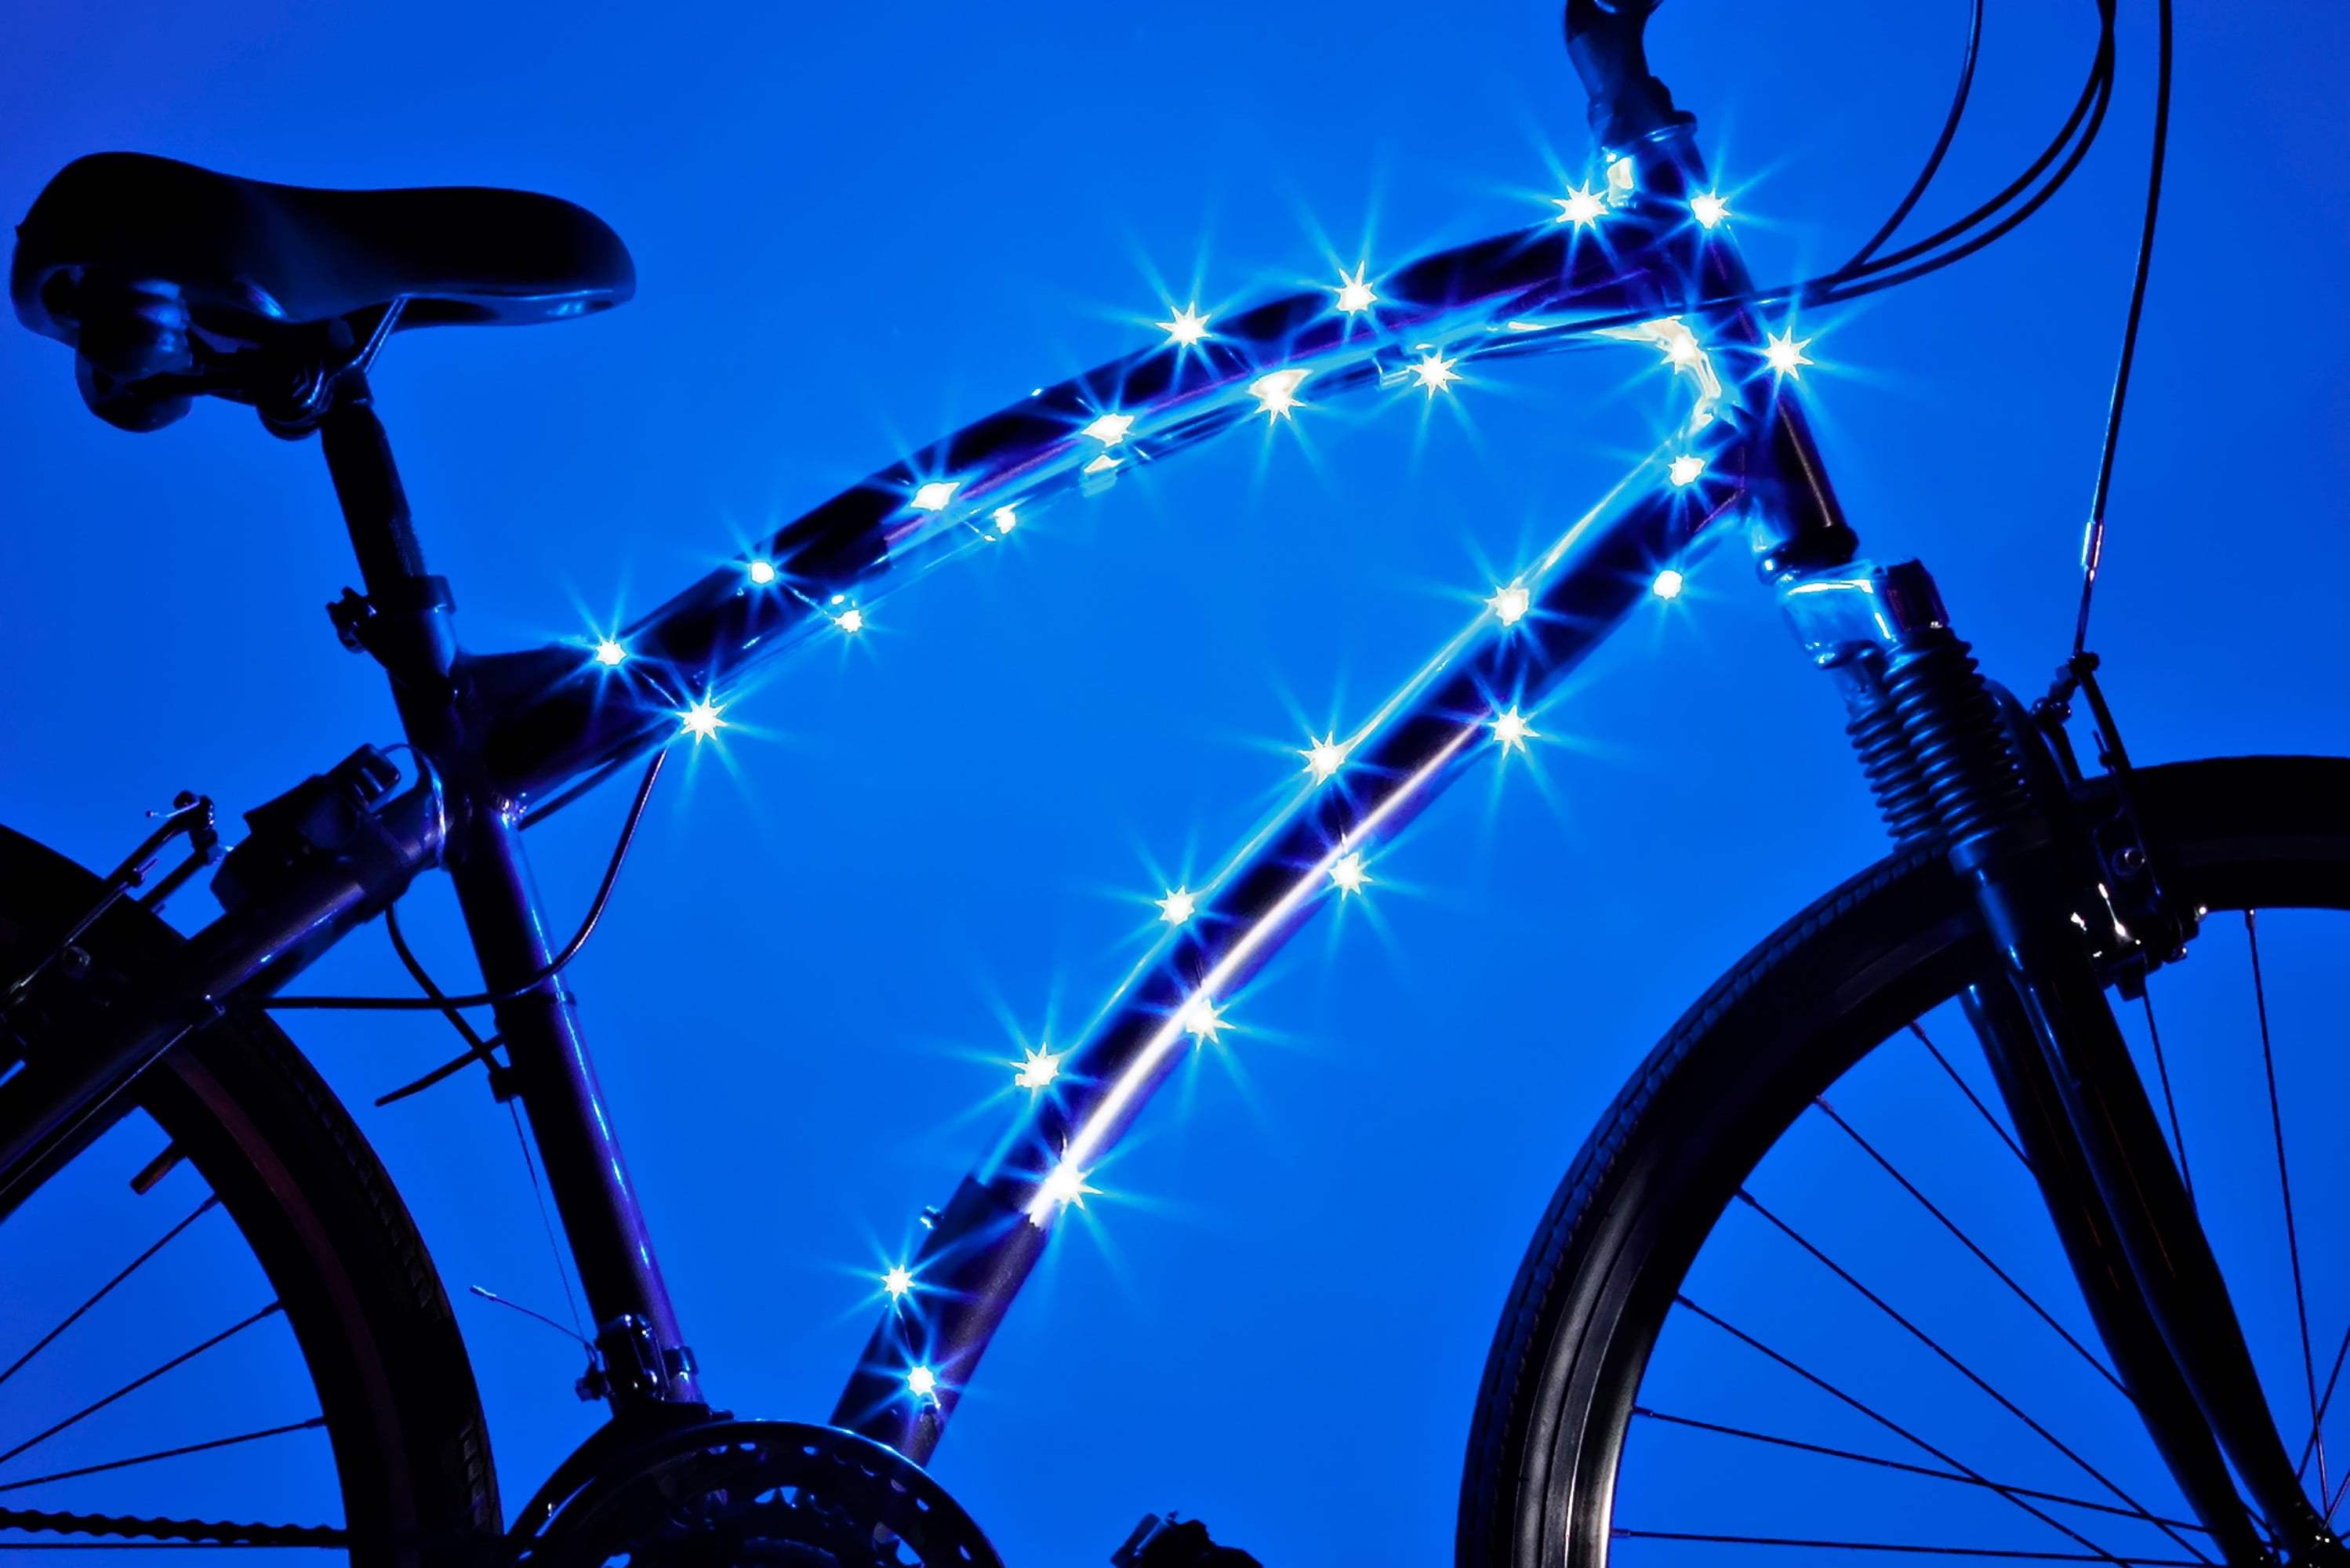 Details about   LED RECHARGEABLE FRAME LIGHT Bike Bicycle Glow safety 3 modes flashing cycling